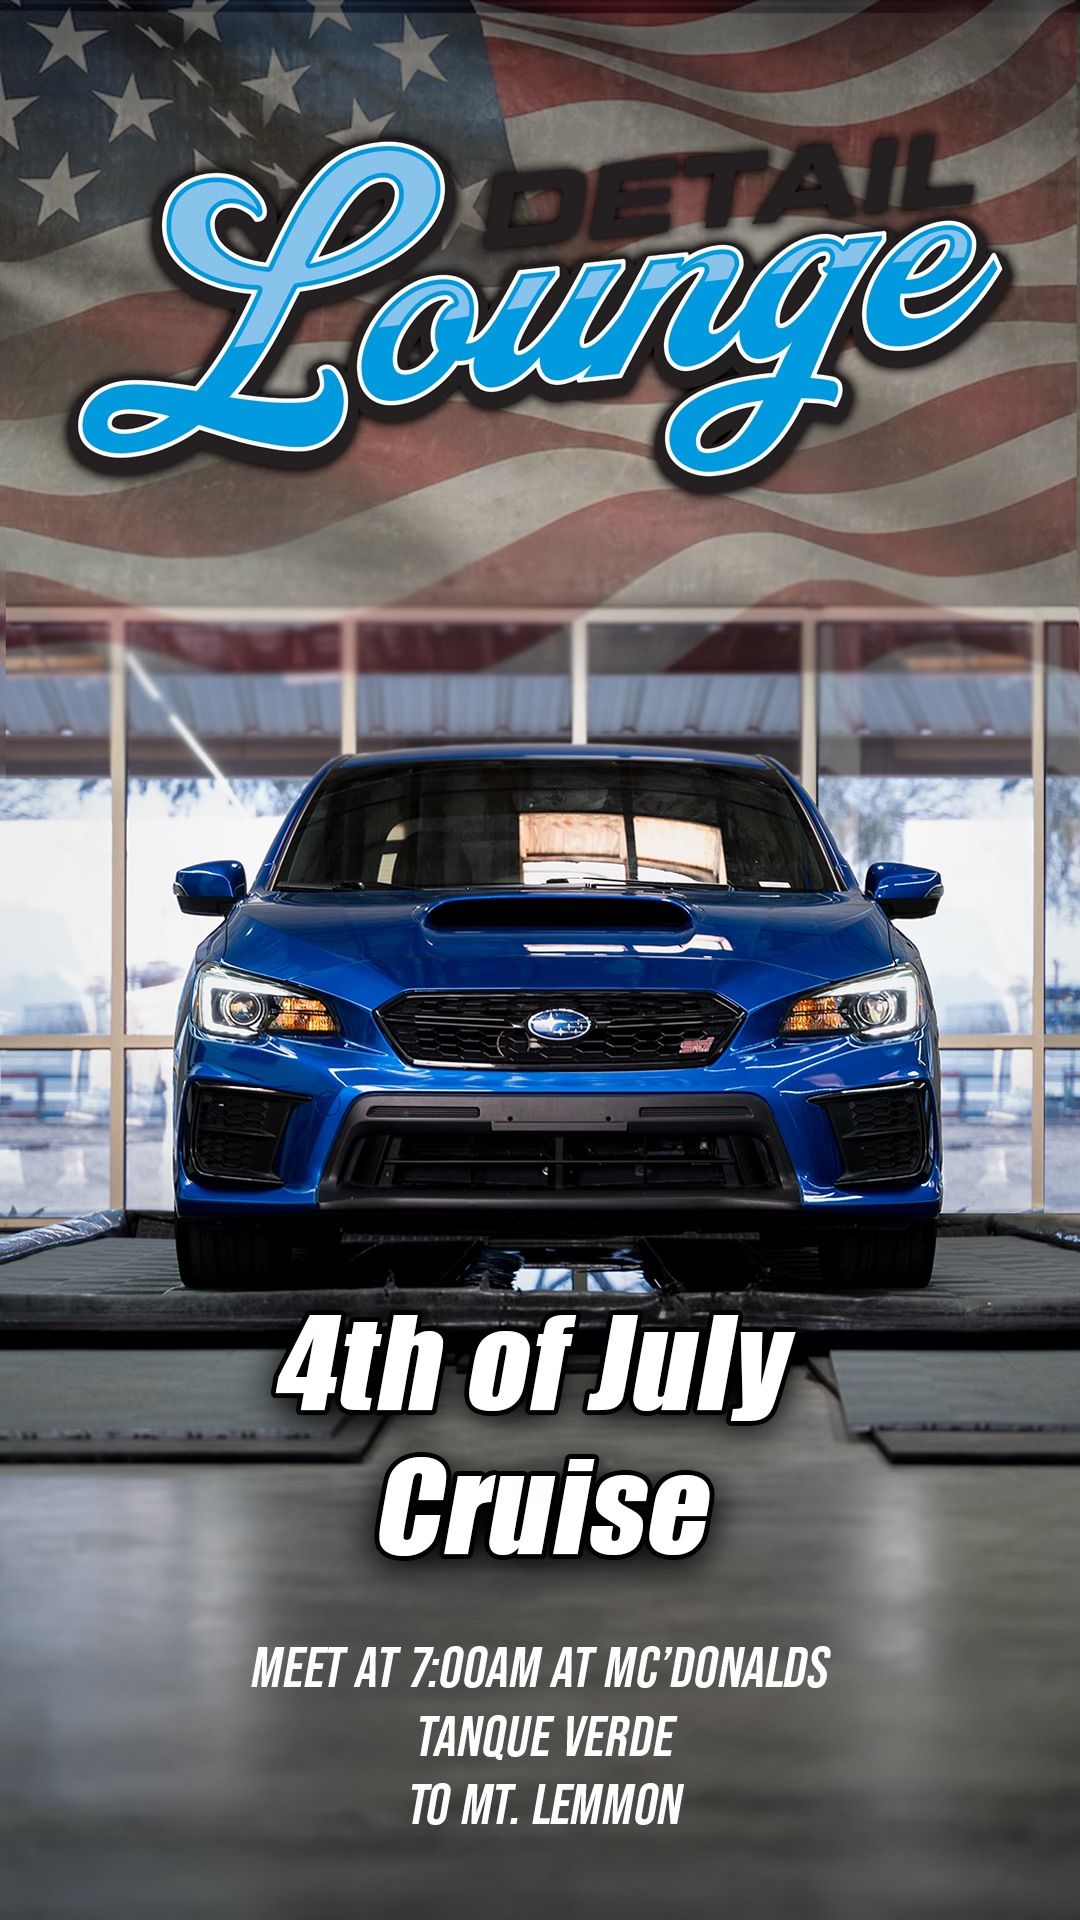 4th of July Cruise Up Mt. Lemmon - Hosted by Detail Lounge